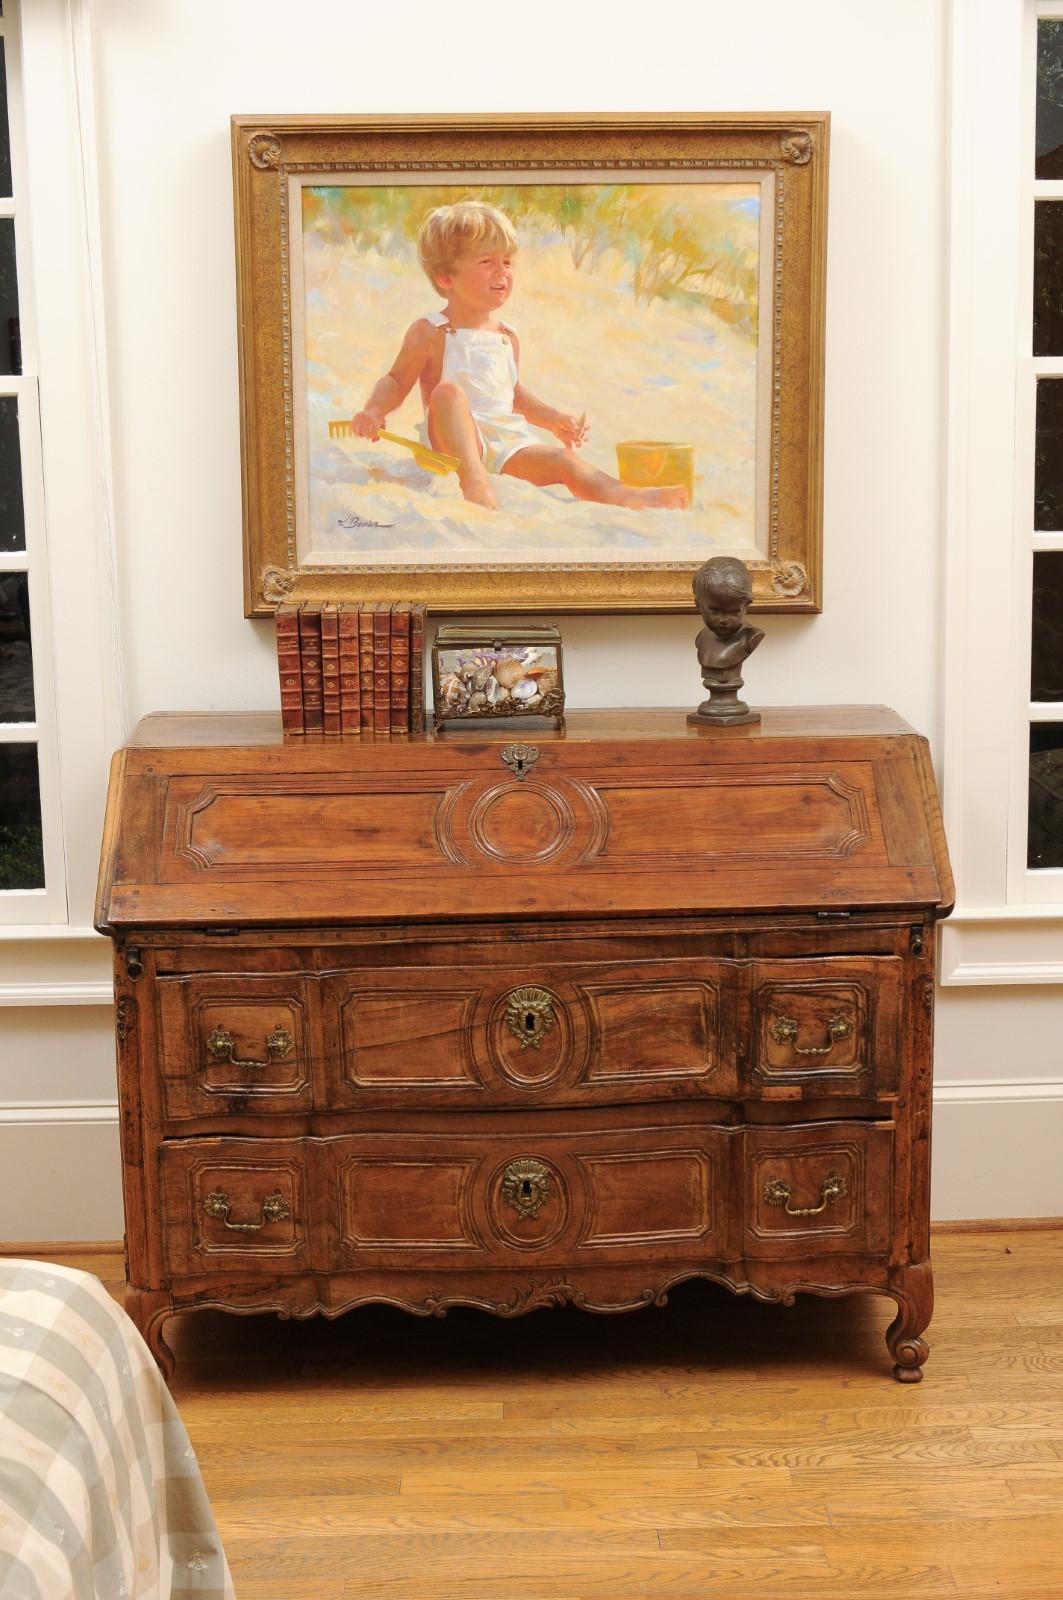 A French Transition period walnut slant front desk from the late 18th century, with drawers and carved apron. Created in France during the last decade of the 18th century, this desk showcases the stylistic characteristics of the Louis XV era, but